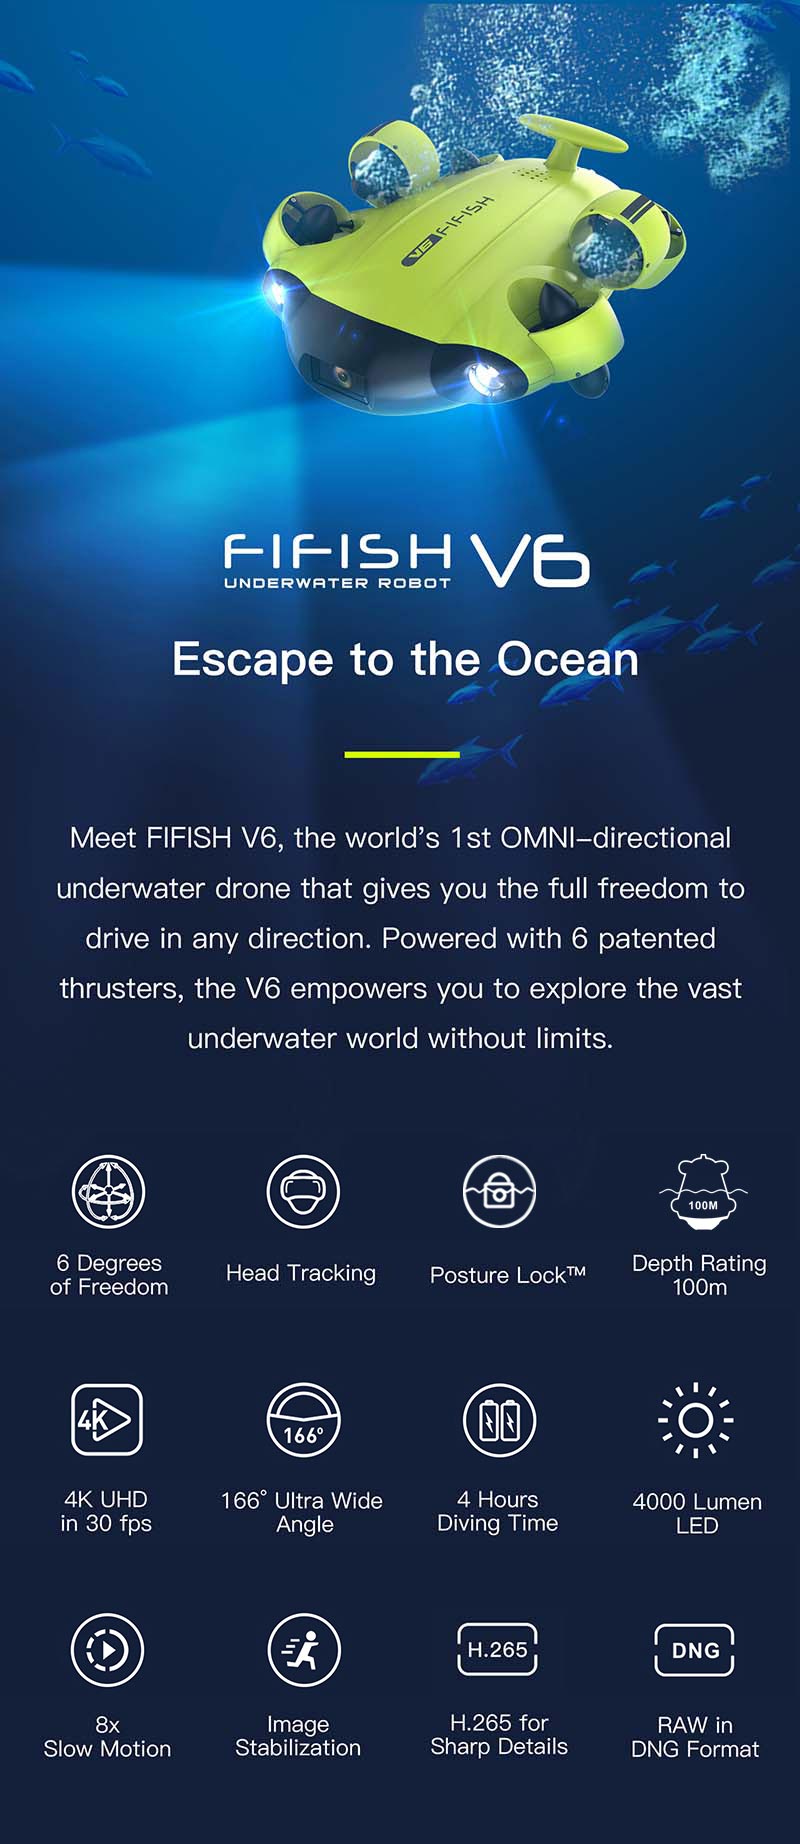 FIFISH-V6-Underwater-Robot-with-4K-UHD-Camera-4-Hours-Working-Time-Head-Tracking-Immersive-VR-Contro-1765757-1